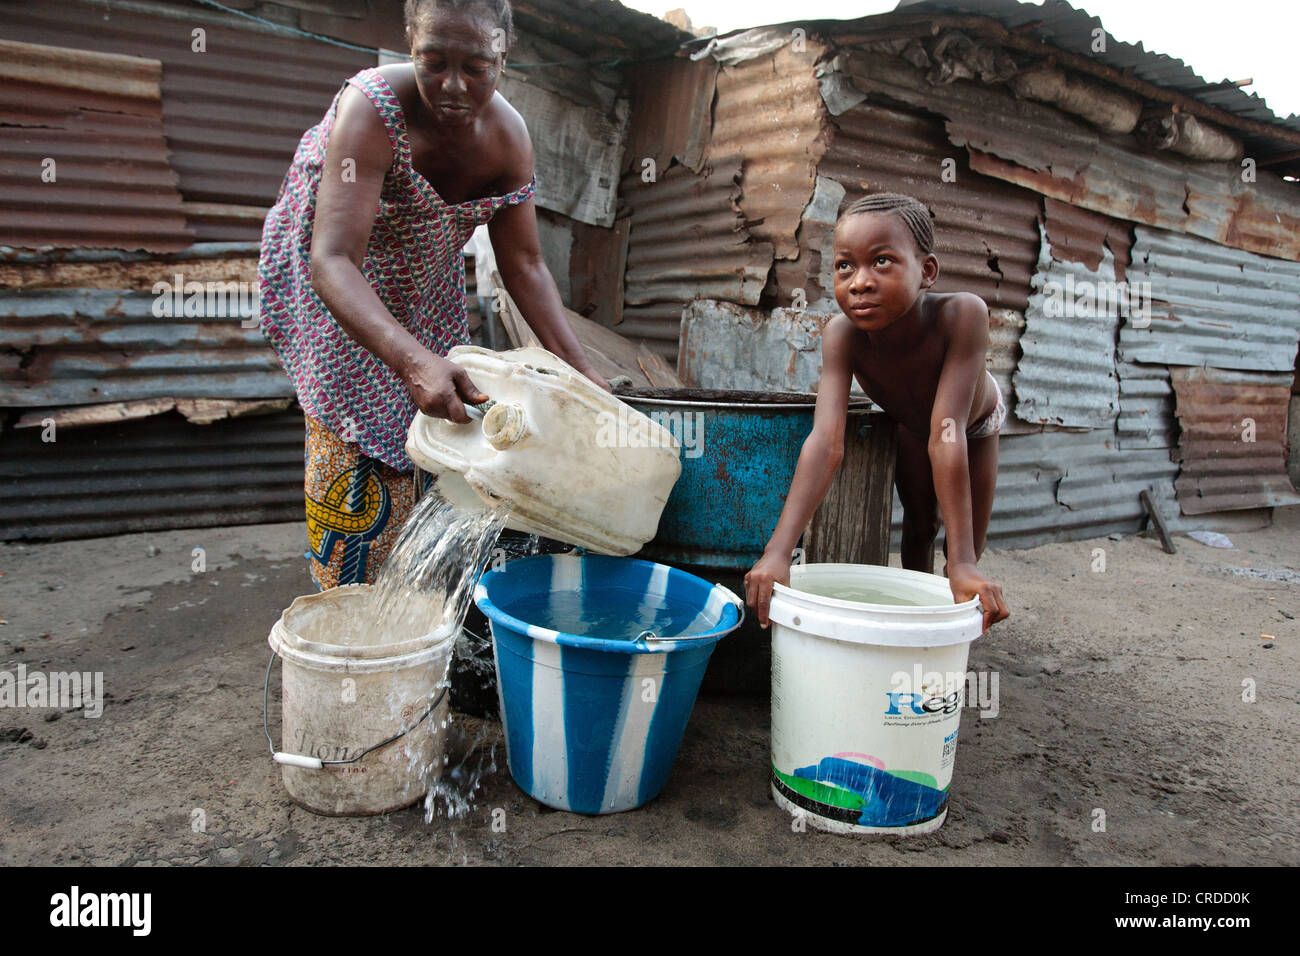 A girl watches while a woman draws water from a well in the West Point slum in Monrovia, Montserrado county, Liberia Stock Photo